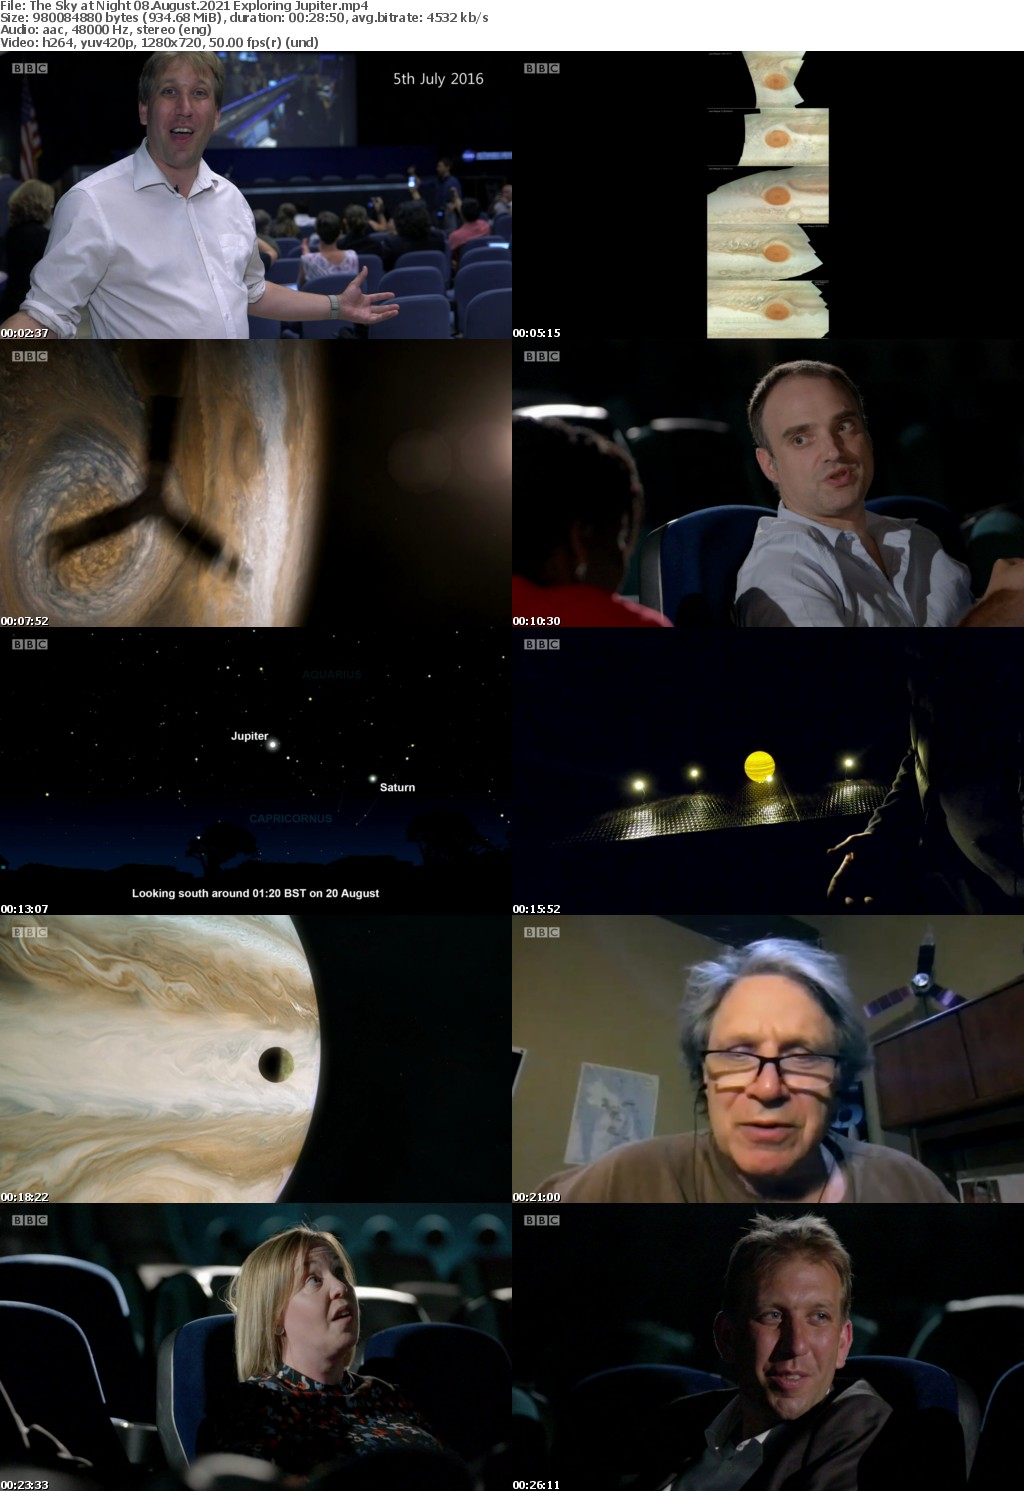 The Sky at Night 08 August 2021 Exploring Jupiter (1280x720p HD, 50fps, soft Eng subs)